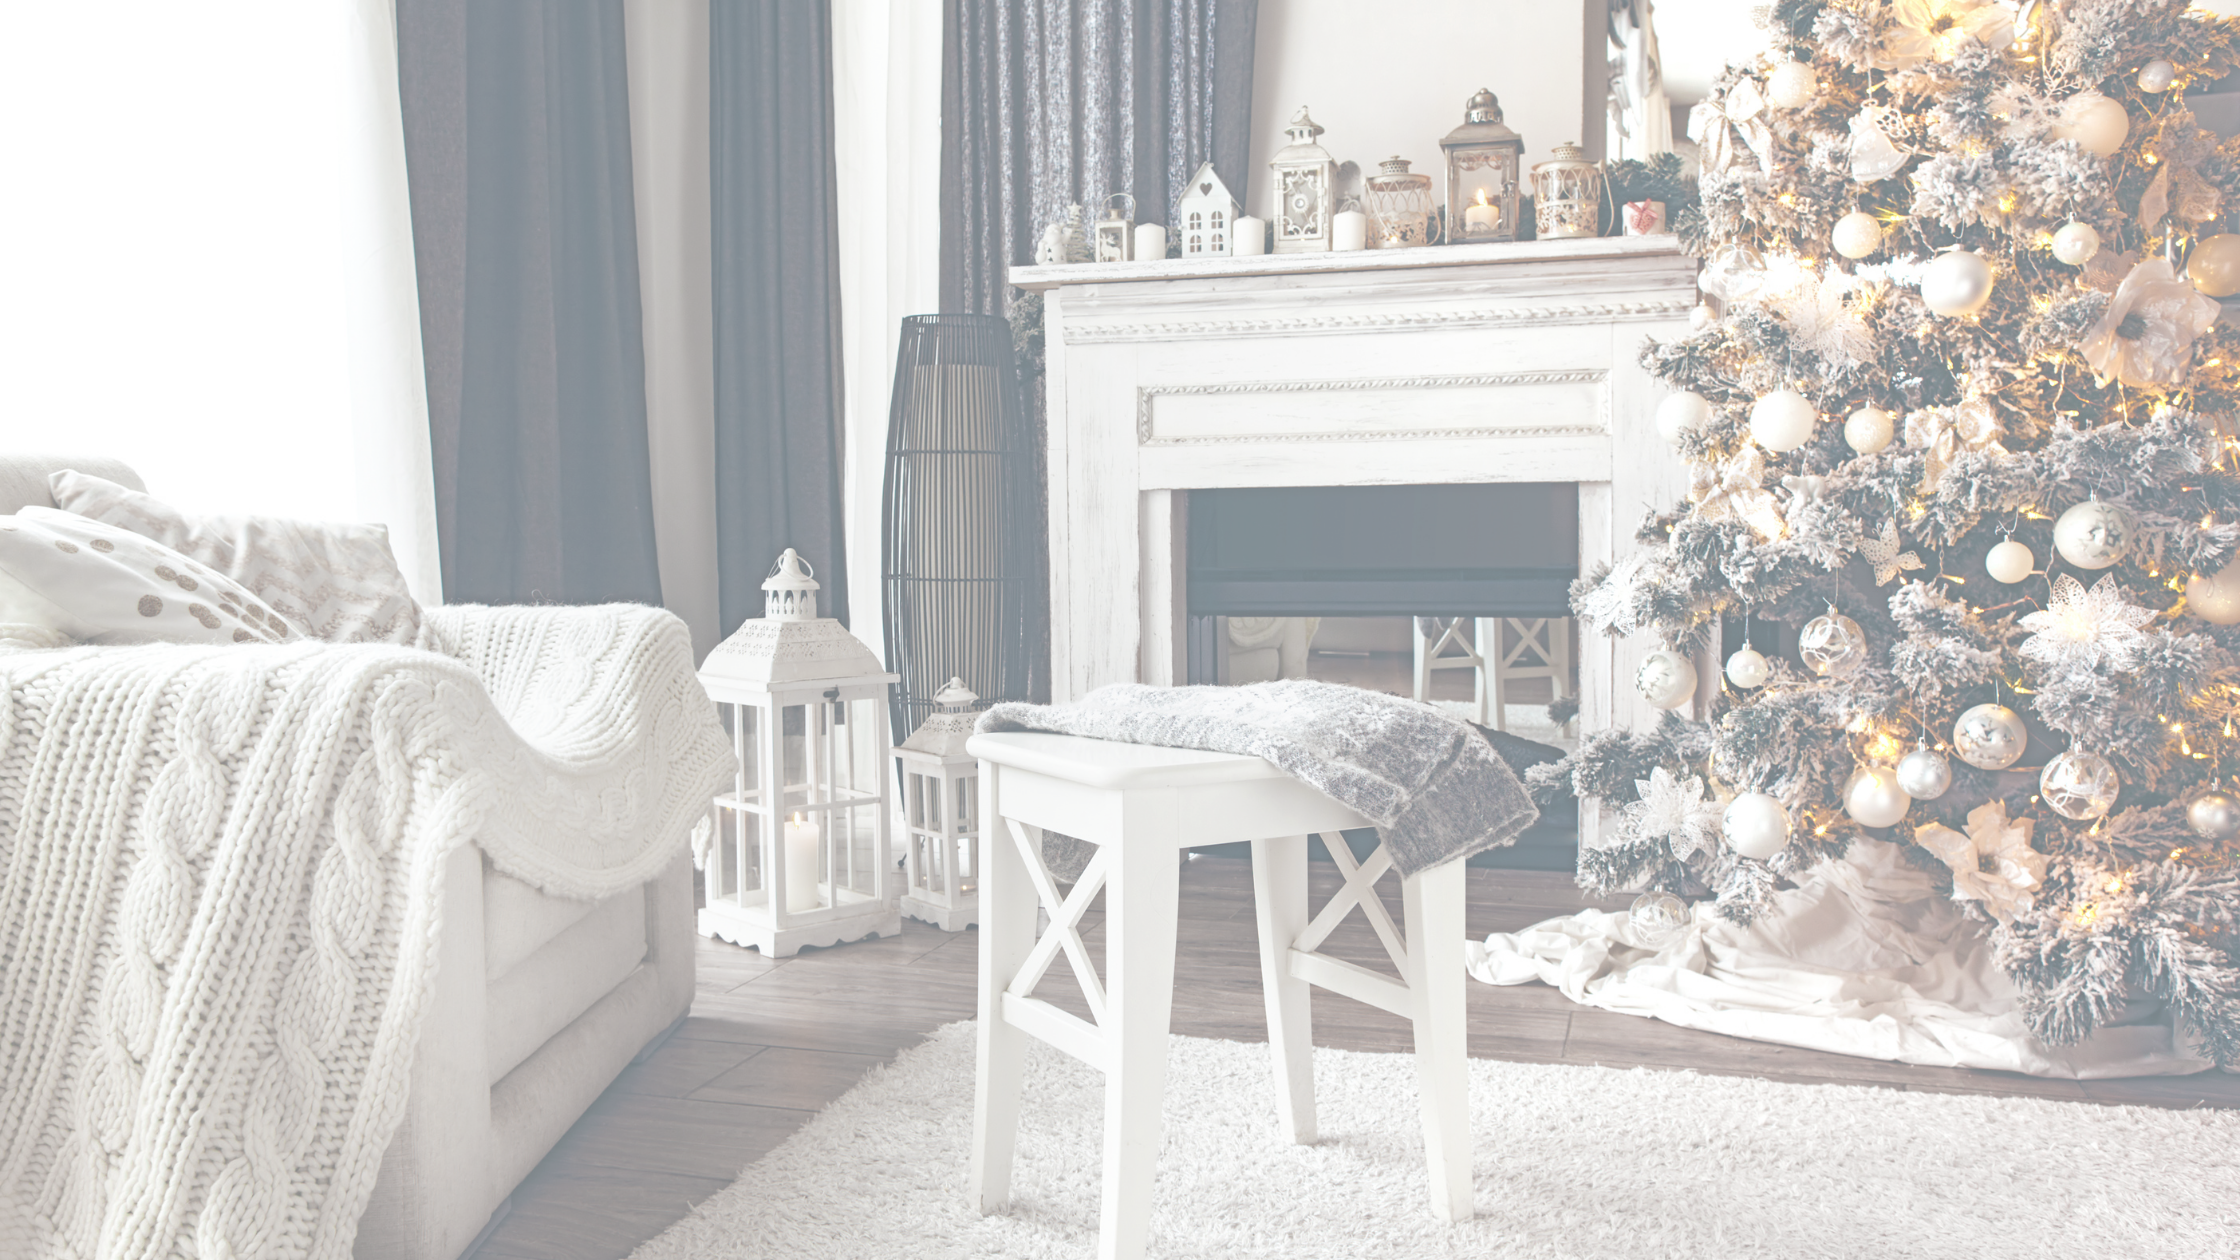 'Tis the Season: Why Buying or Selling your Home during the Holidays Makes Sense